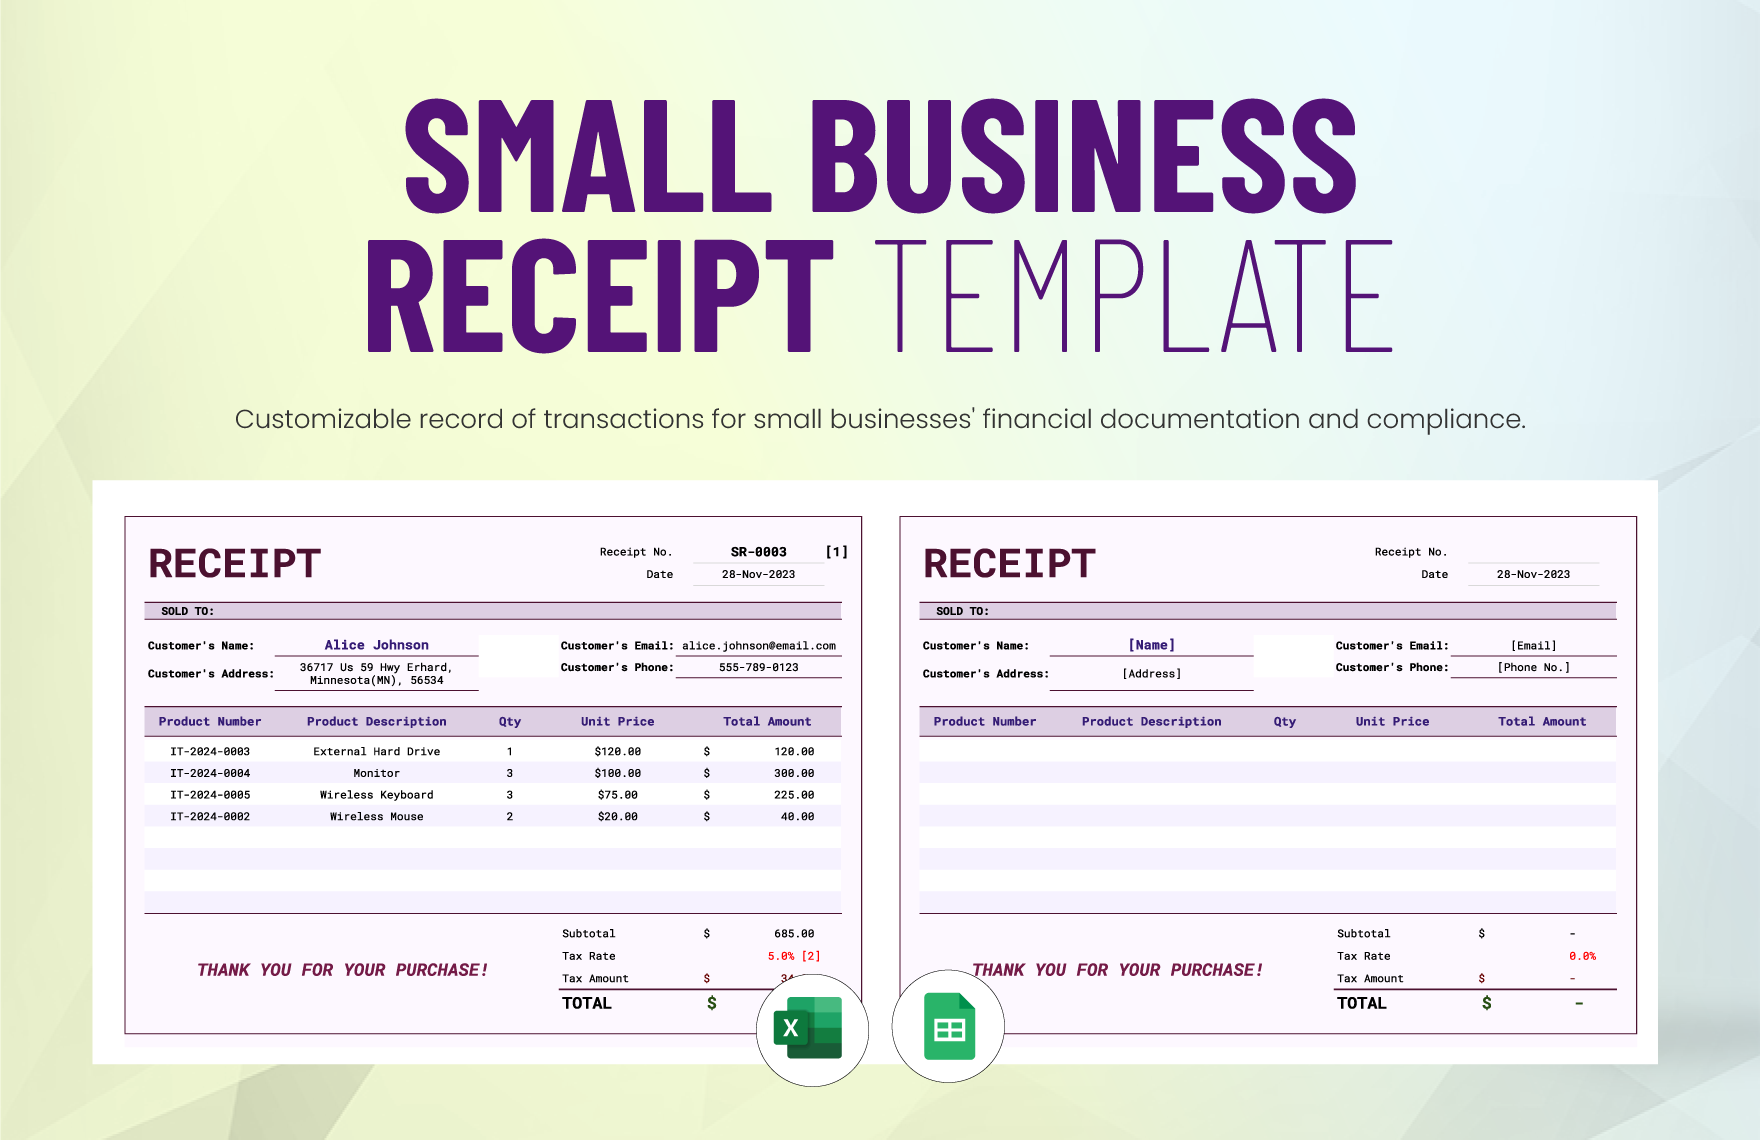 Small Business Receipt Template in Excel, Google Sheets